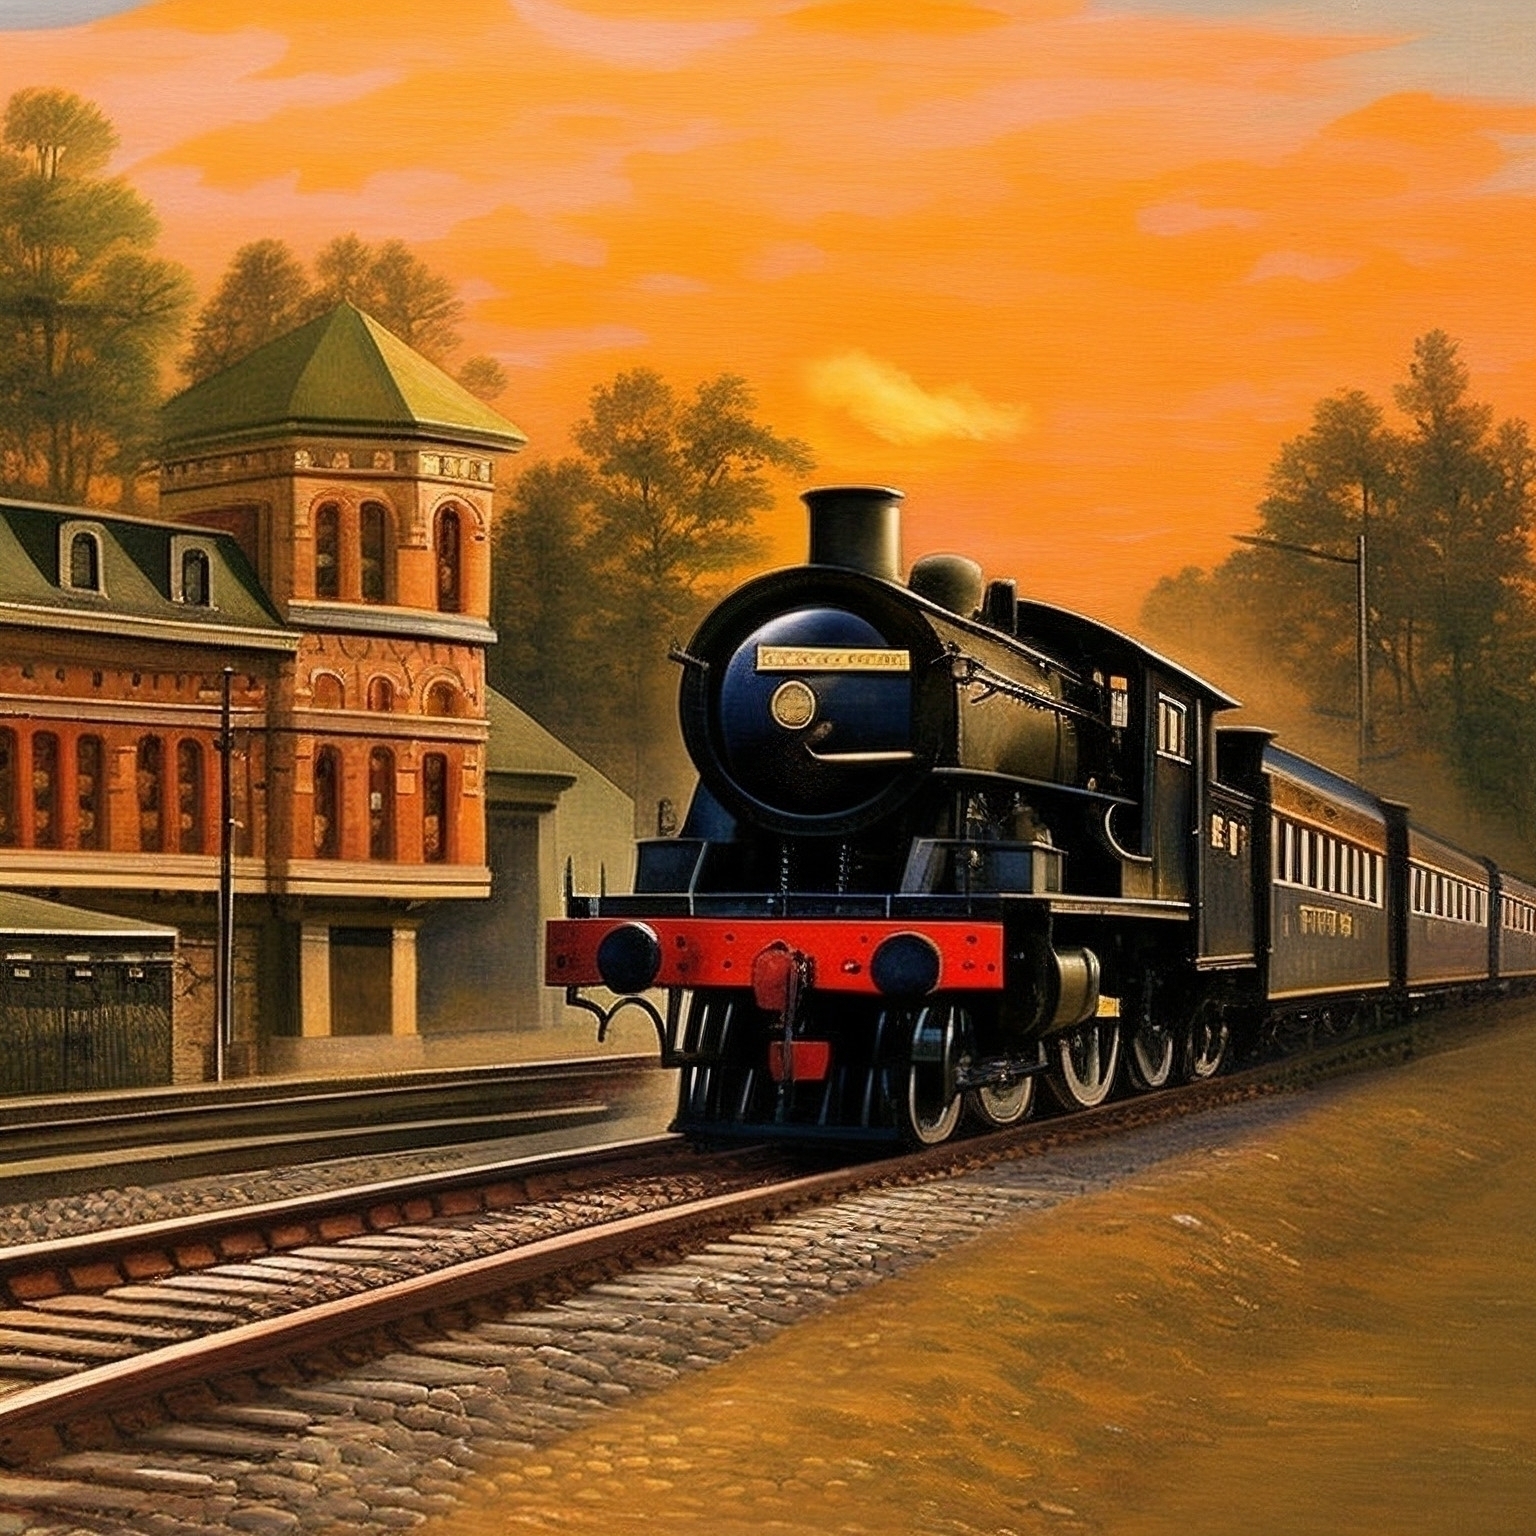 Up-scaled version of a steam engine leaving the trainstation at sunset with last manual touches